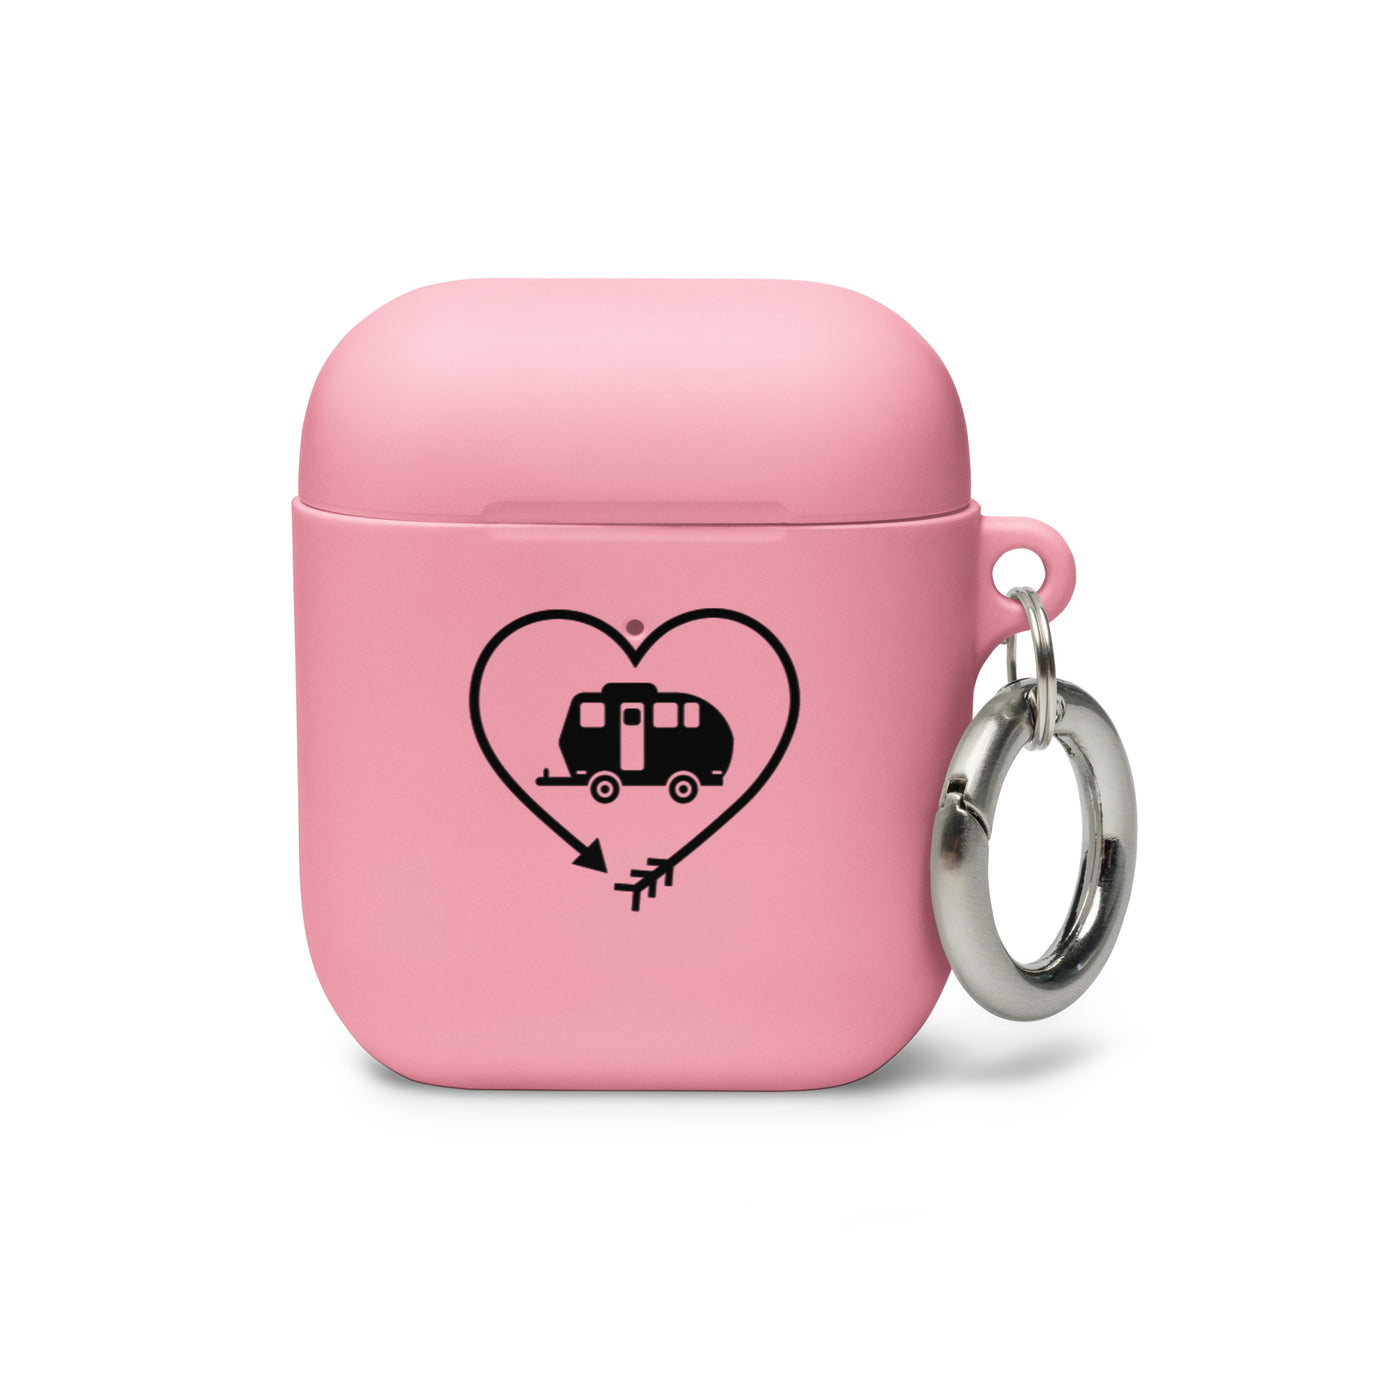 Pfeil, Herz Und Camping 2 - AirPods Case camping Pink AirPods